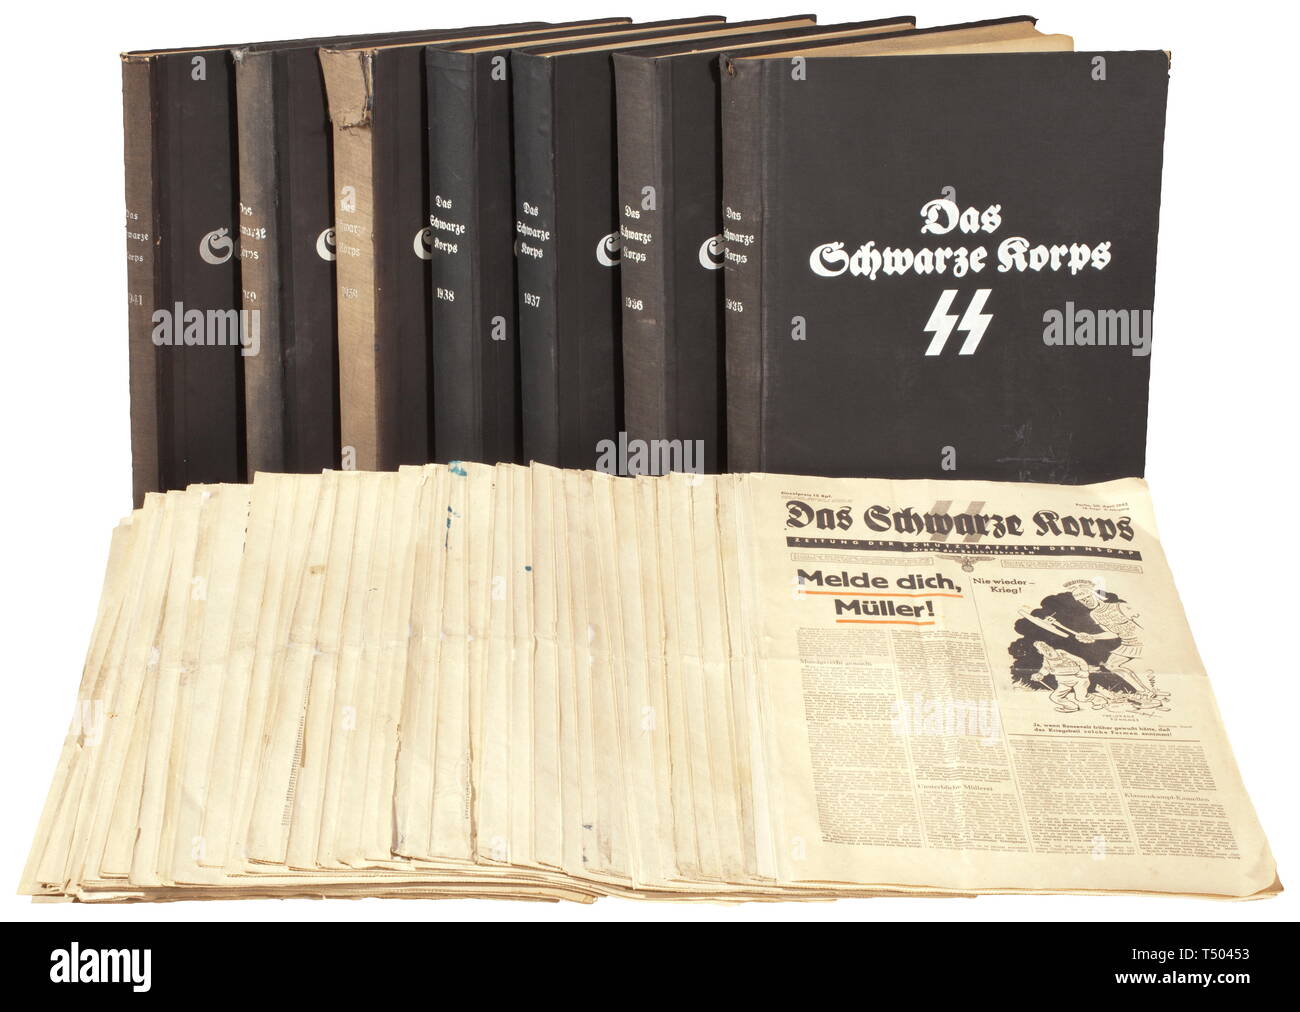 Seven volumes of 'Das Schwarze Korps'. The newspaper of the Schutzstaffeln of the NSDAP, organ of the SS Reich leadership, Eher Verlag, Niederlassung Berlin 1935 - 1941. In black linen covers with contemporary titles printed in white. Also including ca. 70 single issues 1942 - 1945. Not checked for completeness, damaged in places, age marks. Dimensions ca. 32.5 x 47 cm. Rare. historic, historical, 20th century, 1930s, 1940s, Waffen-SS, armed division of the SS, armed service, armed services, NS, National Socialism, Nazism, Third Reich, German Reich, Germany, military, milit, Editorial-Use-Only Stock Photo